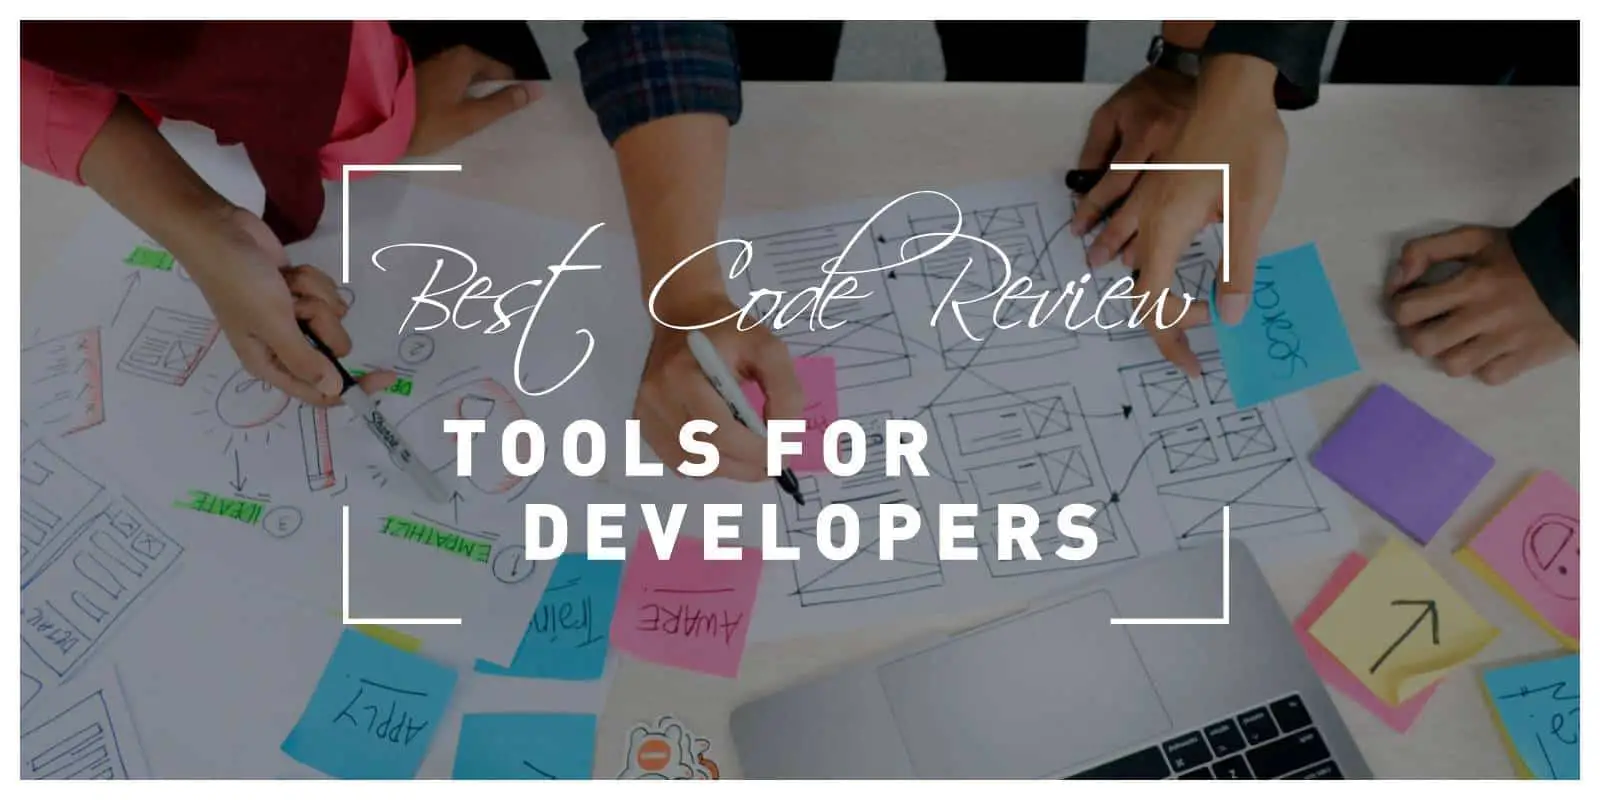 Six Best Code Review Tools for Developers